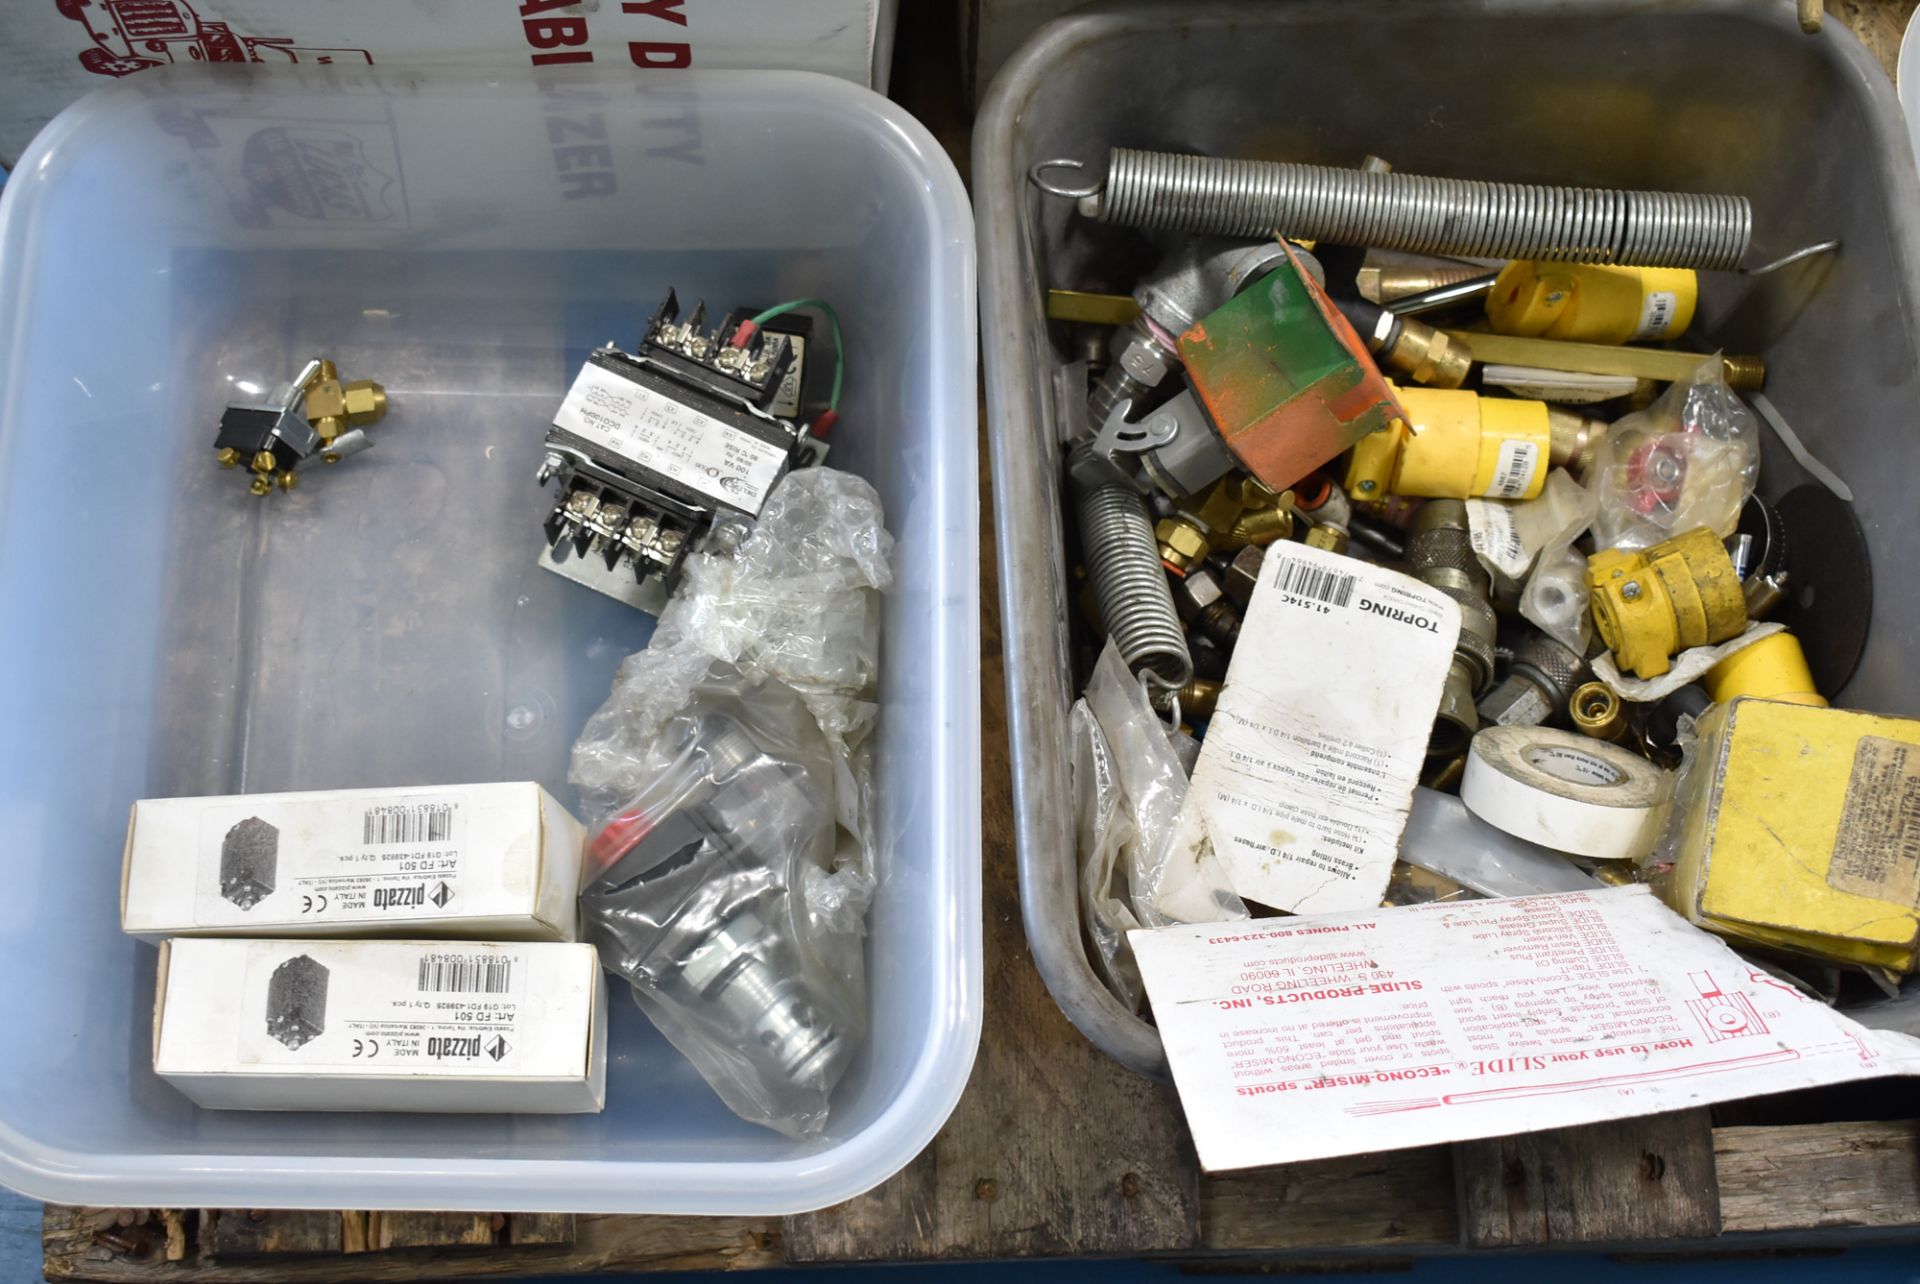 LOT/ SKID WITH PLASTIC INJECTION MOLDING MACHINE SPARE PARTS - Image 6 of 7